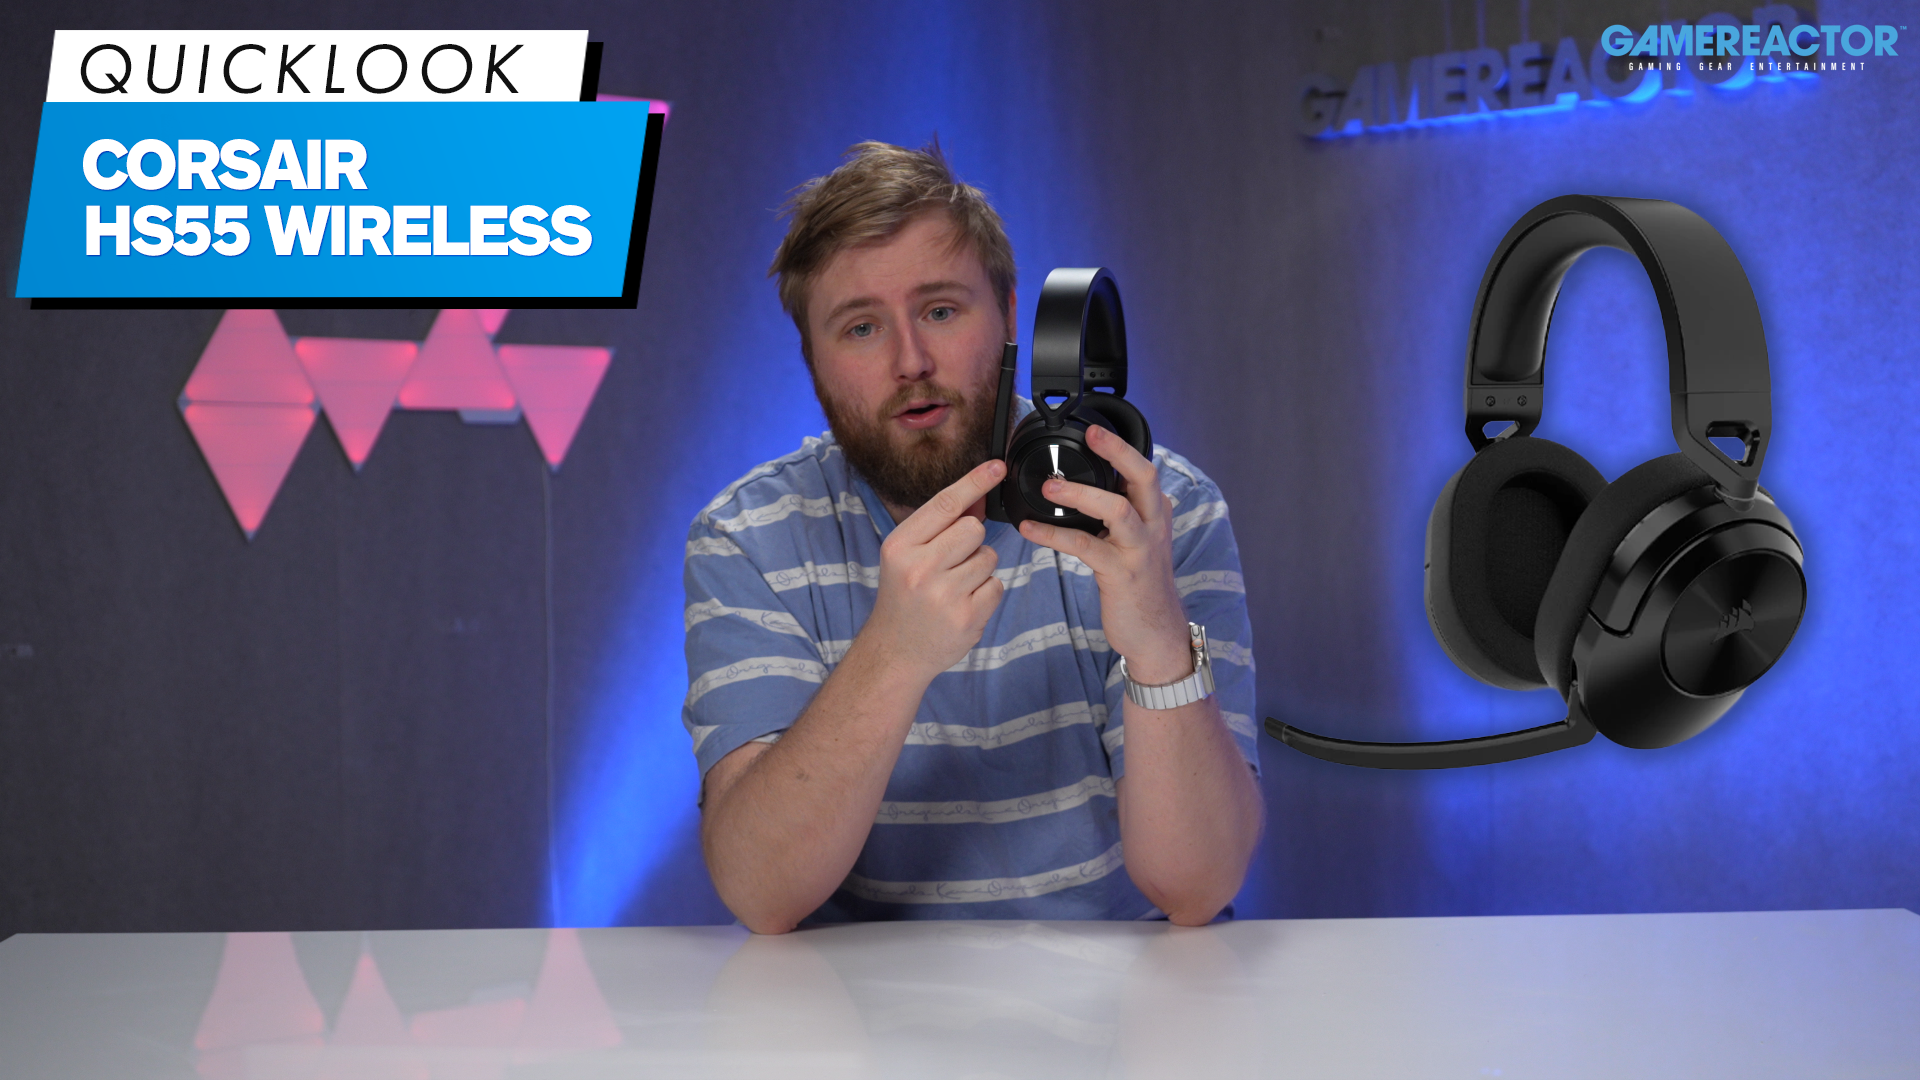 Are you looking for a wireless headset?  Discover the latest model from Corsair